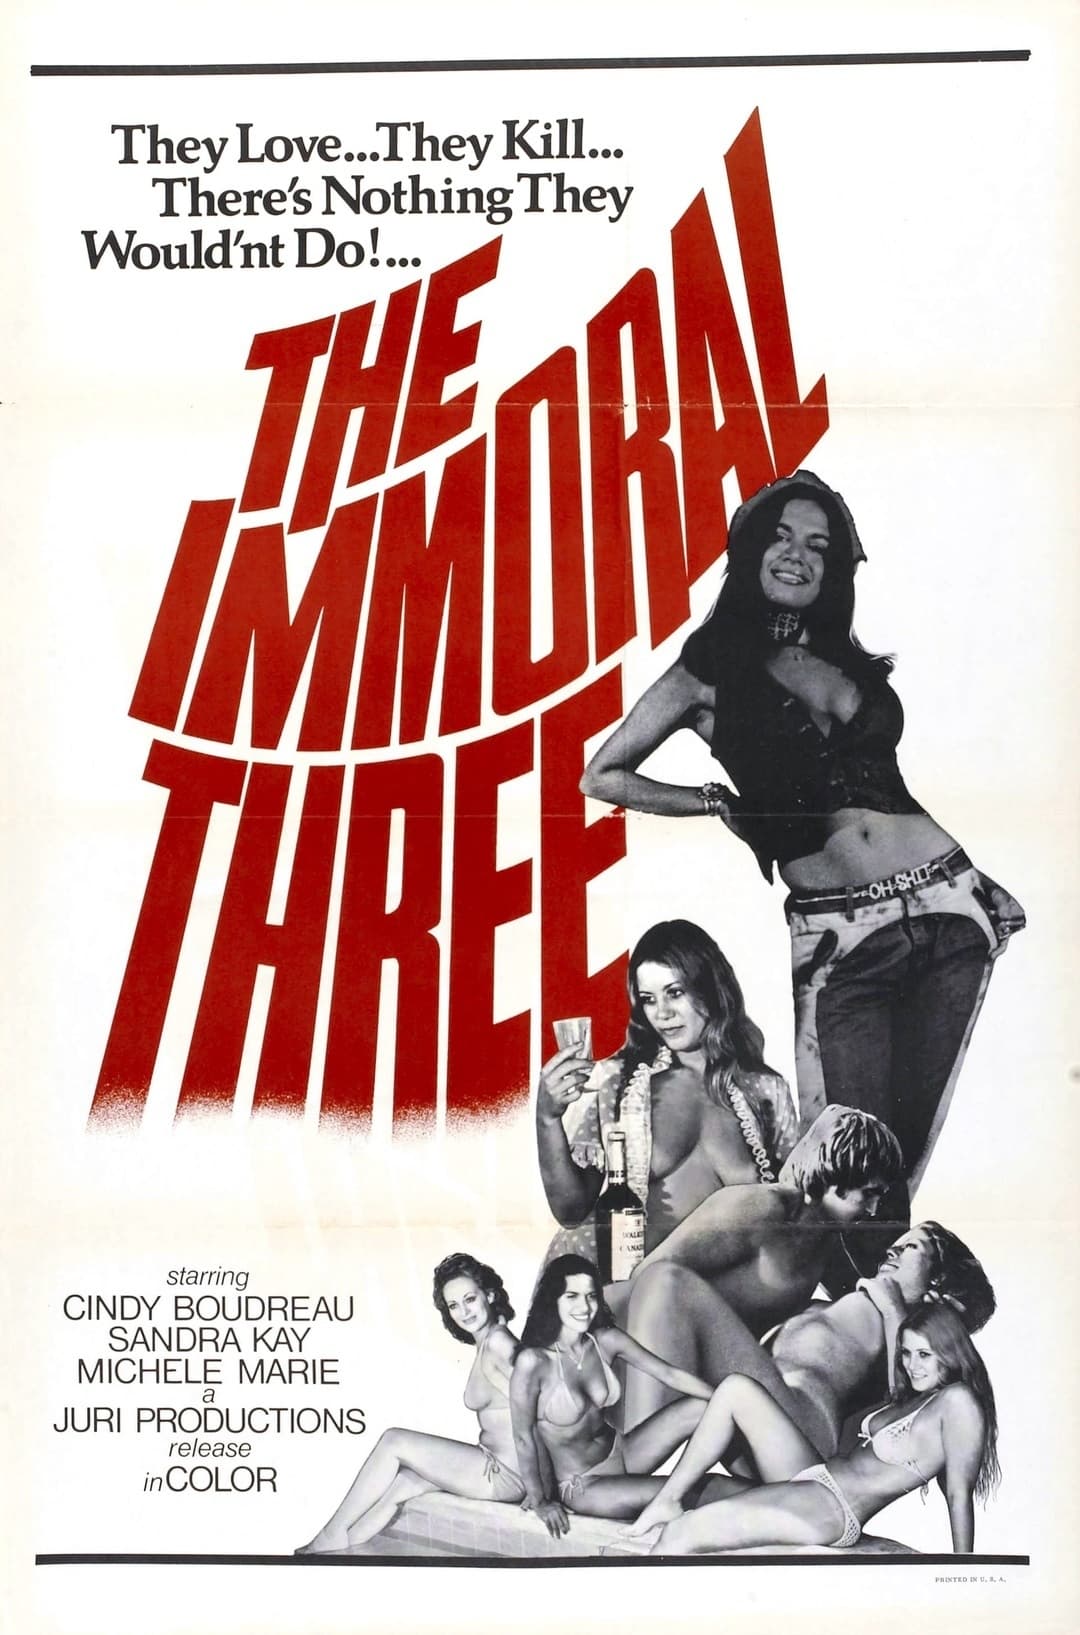 The Immoral Three